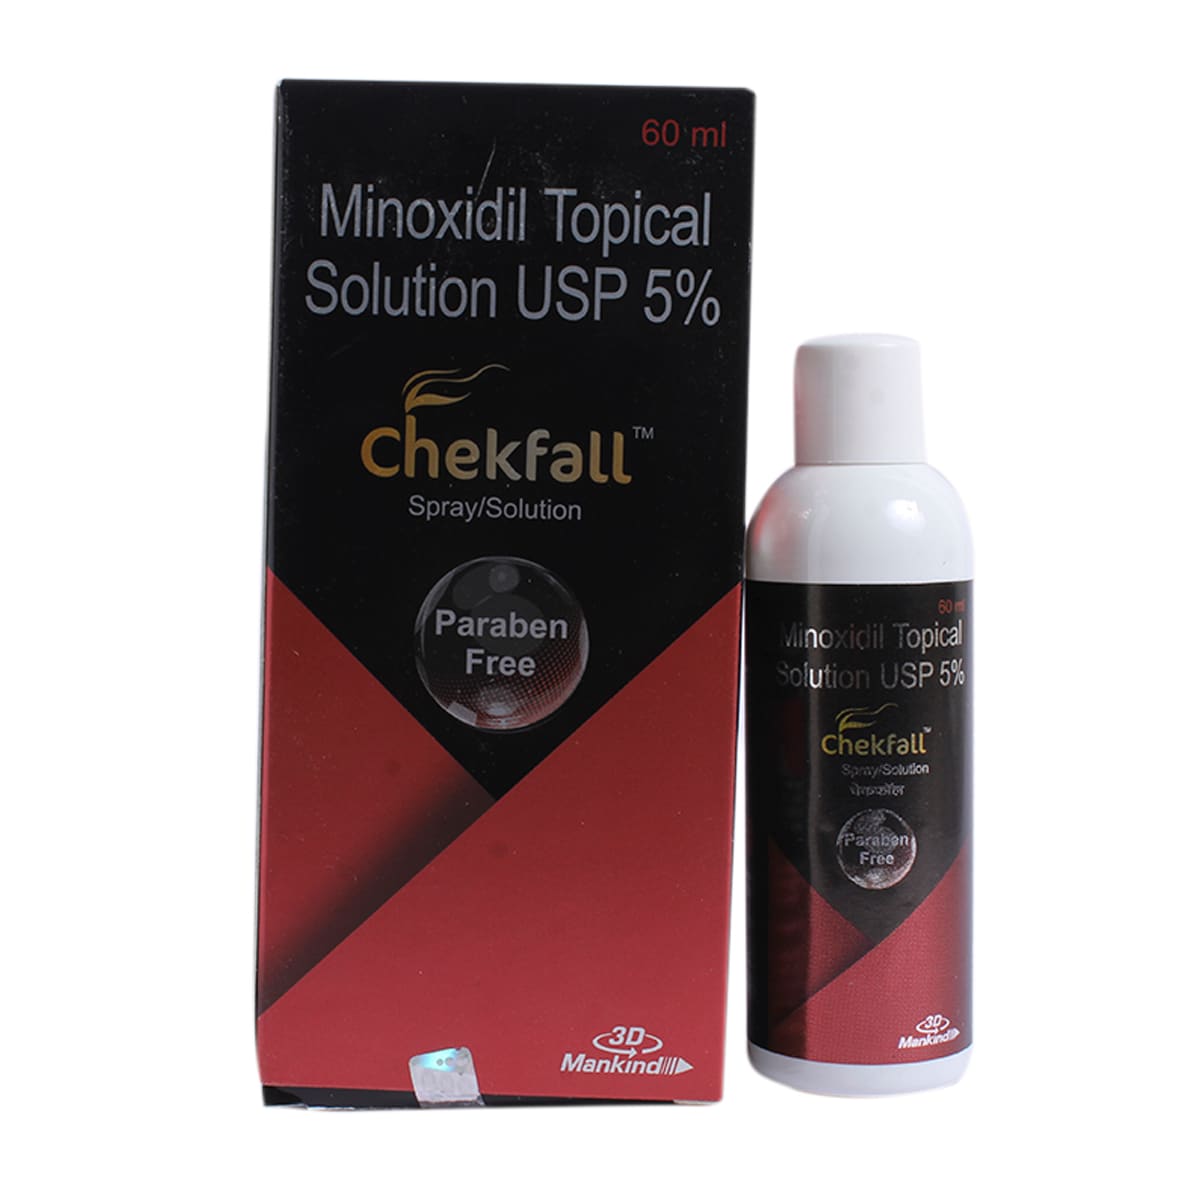 Chekfall 5% Solution 60 ml Price, Uses, Side Effects, Composition - Apollo  Pharmacy